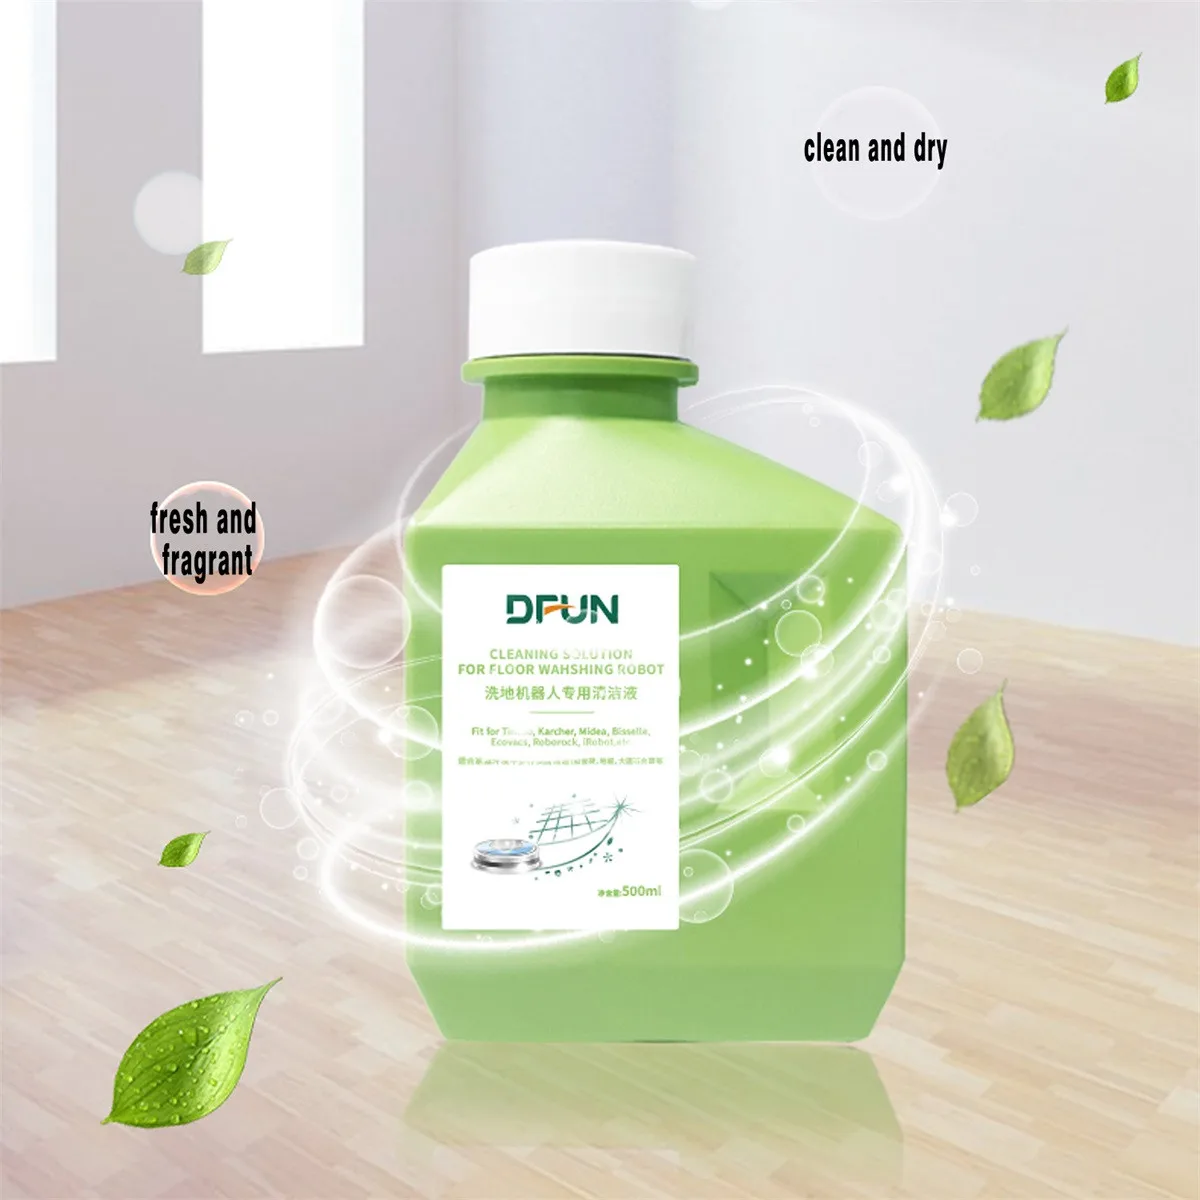 

New Stain Remover Cleaner For Sweeping Dry Cleaning Liquid Cleaner Eliminate Odor Absorber Household Cleaner 500ml